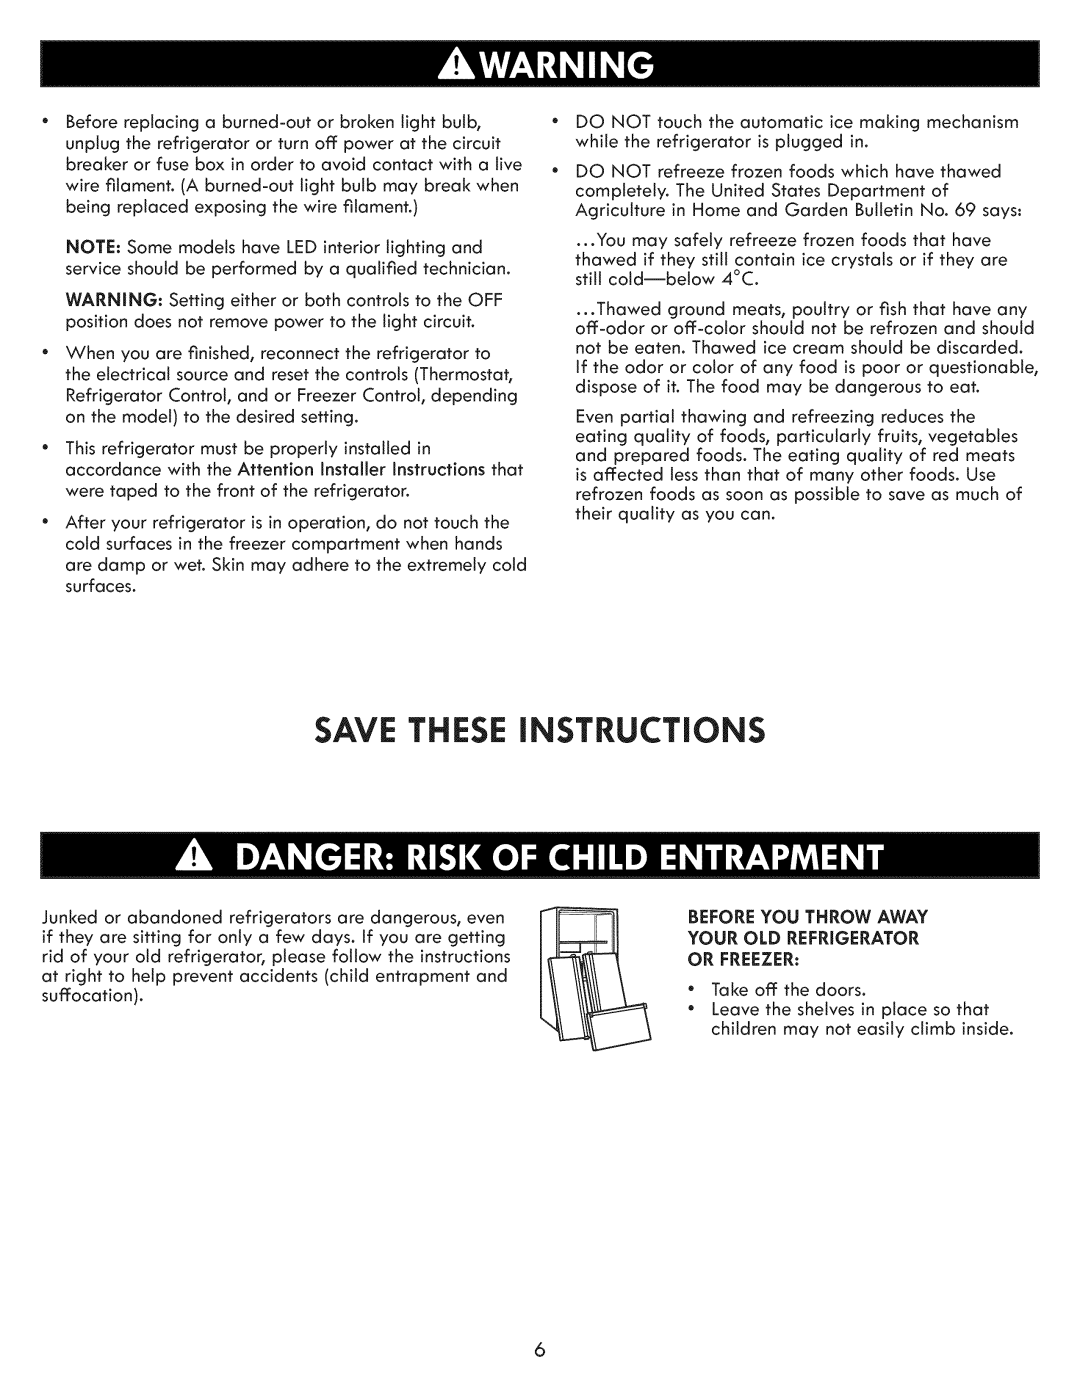 Kenmore 795.7202 manual Save These Instructions, Before You Throw Away Your Old Refrigerator 